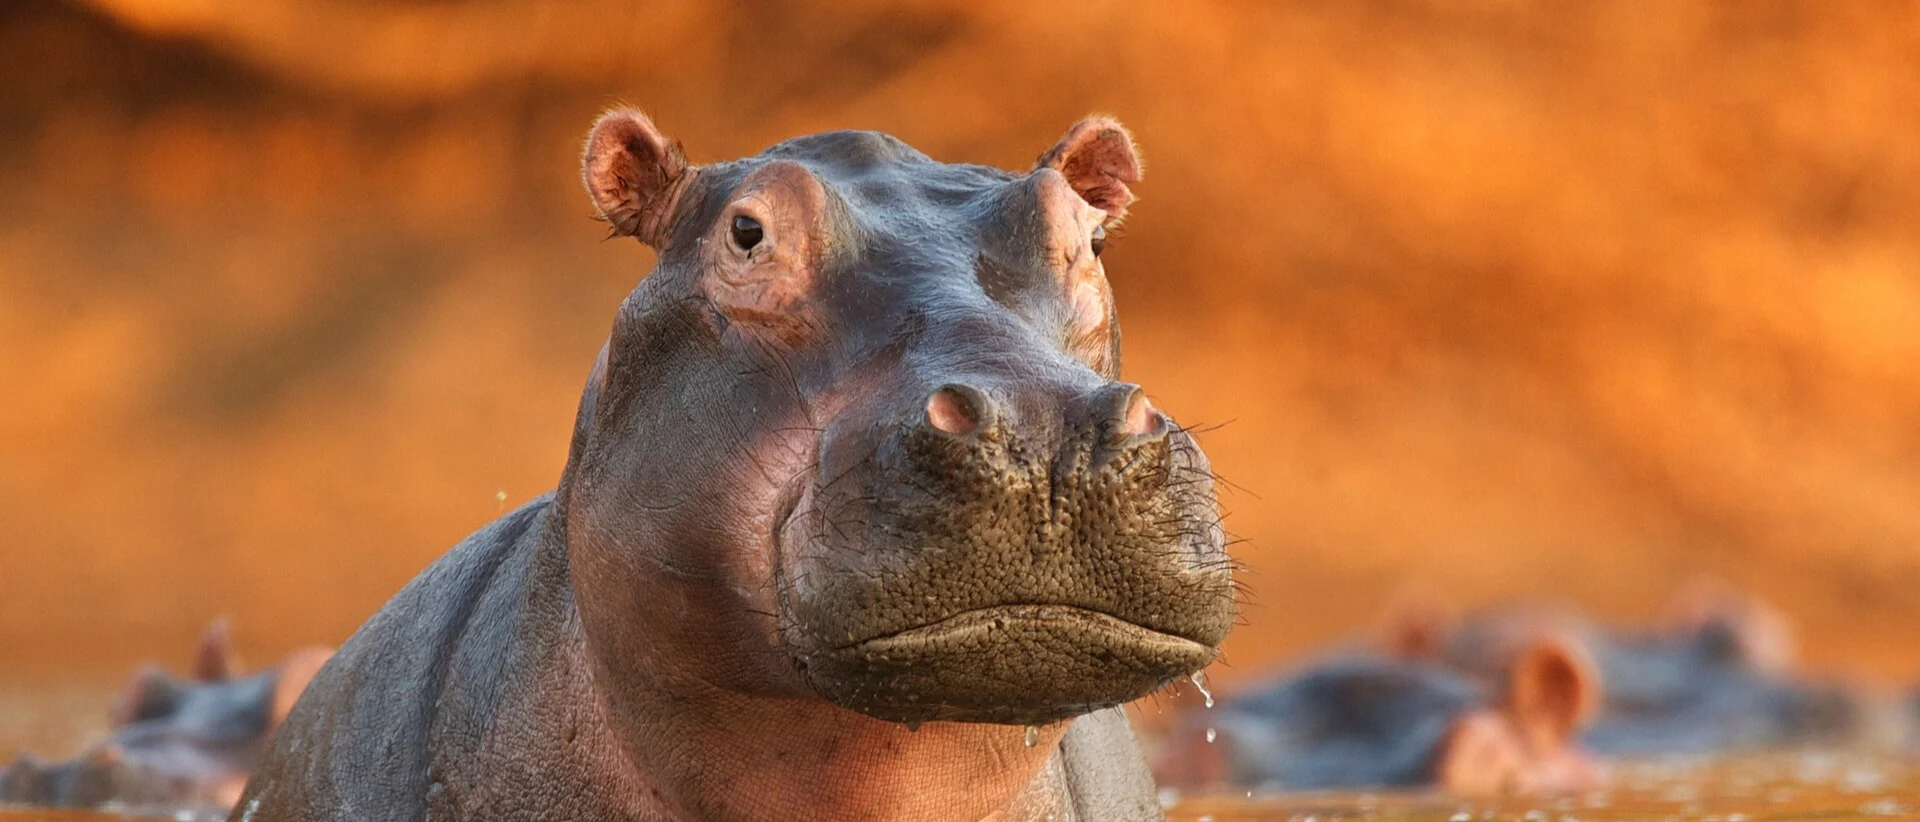 Hippo, West Africa